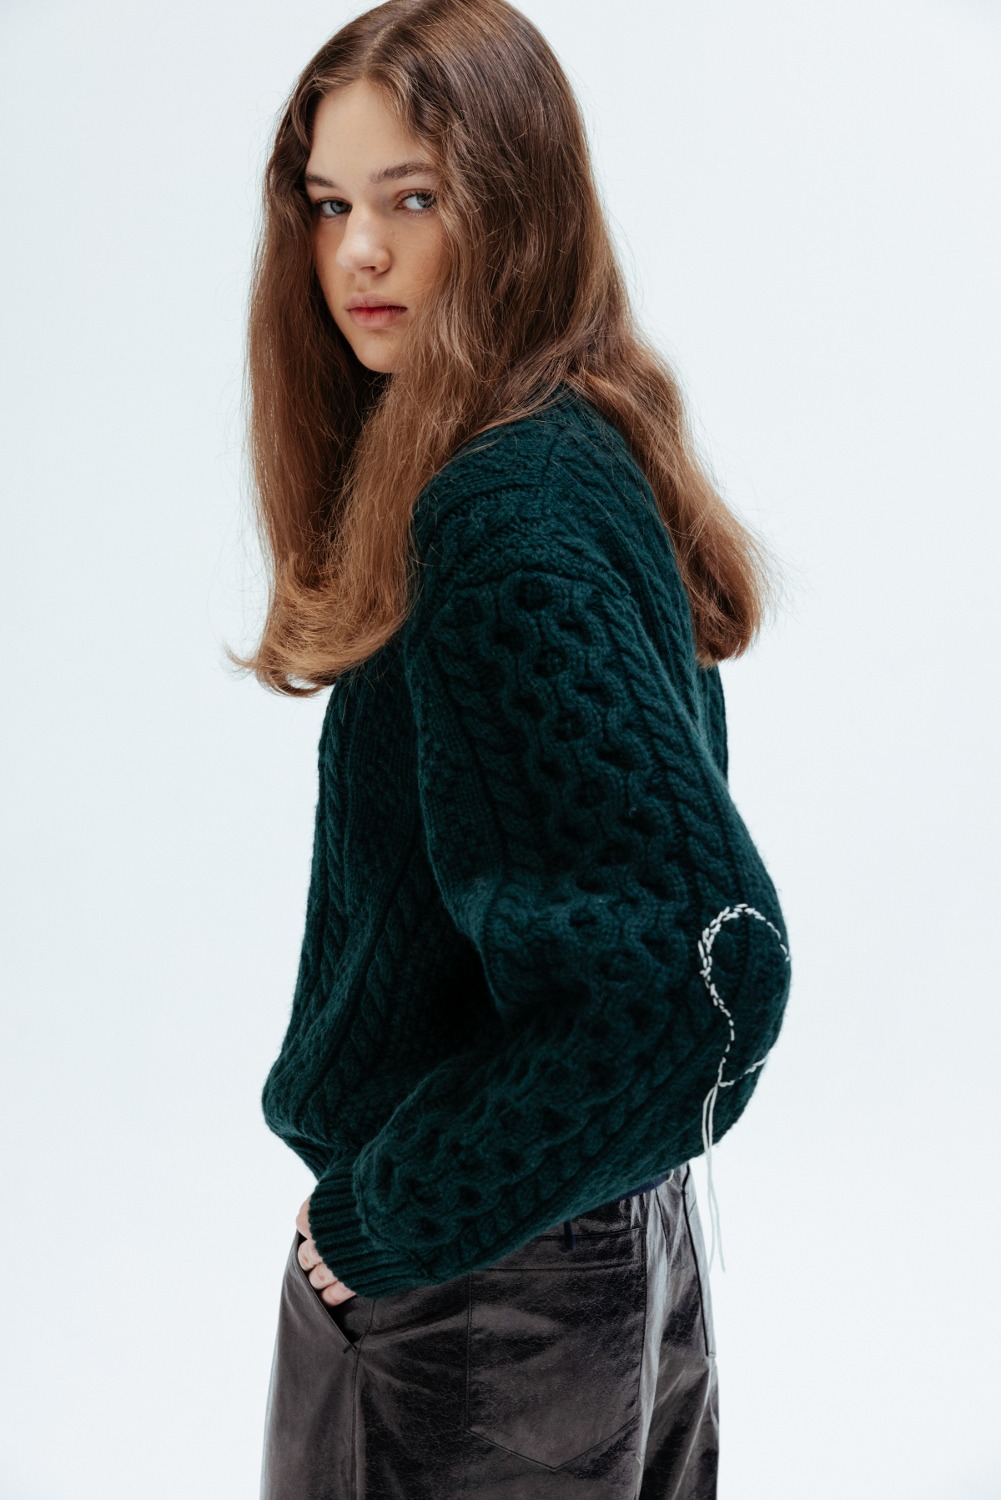 Mused Handmade Heart Cable Knit Pullover - Dark Green